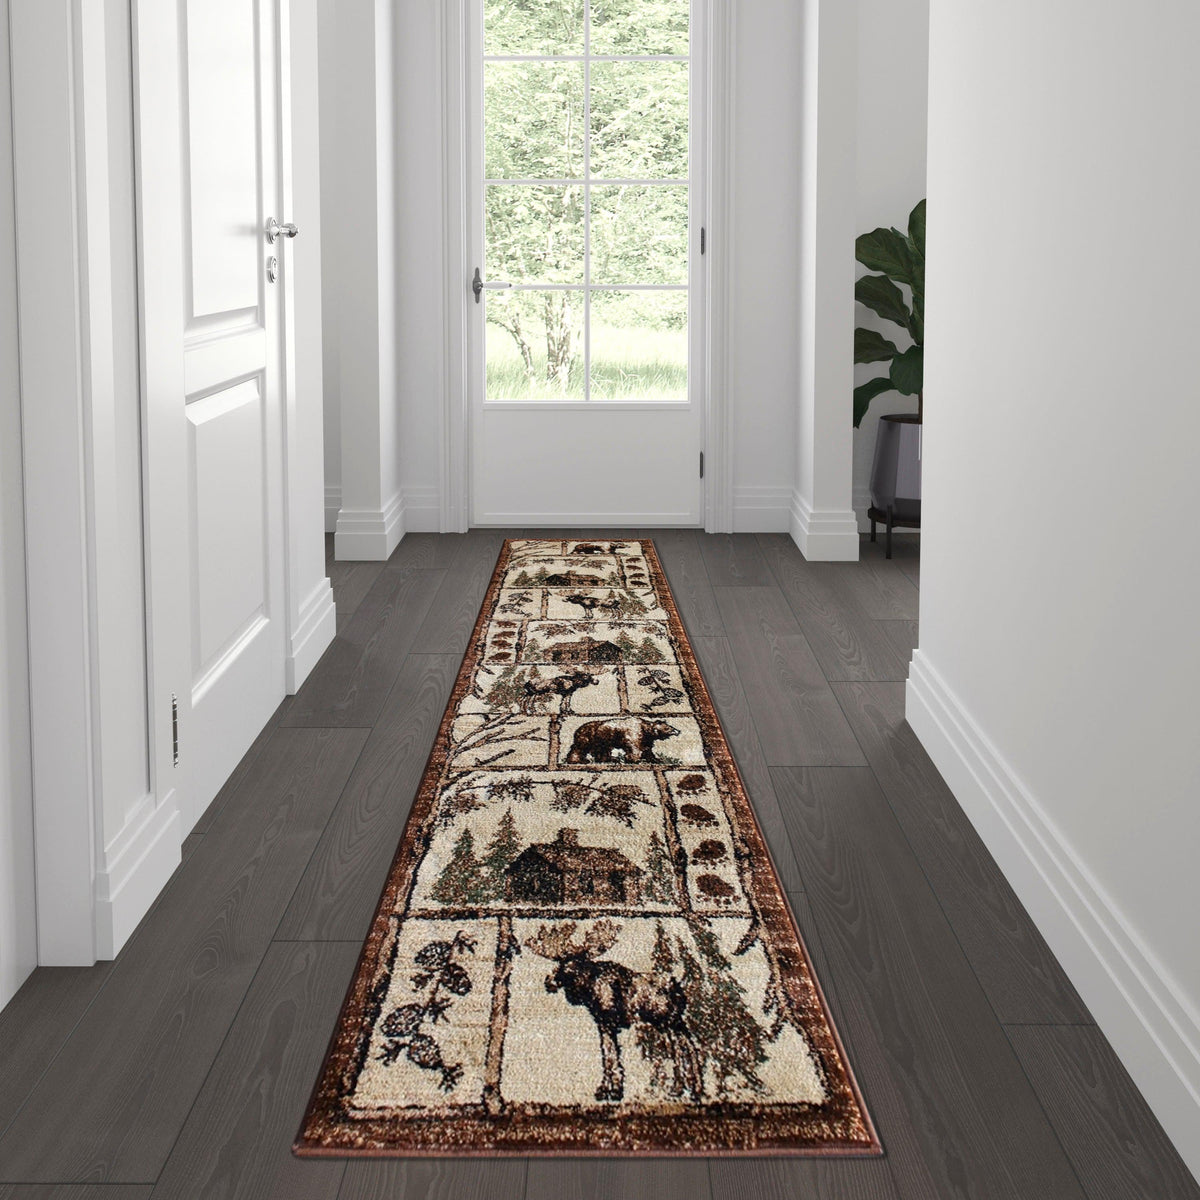 Brown,2' x 7' |#| Wildlife Themed Plush Indoor Area Rug in Shades of Brown - 2' x 7'